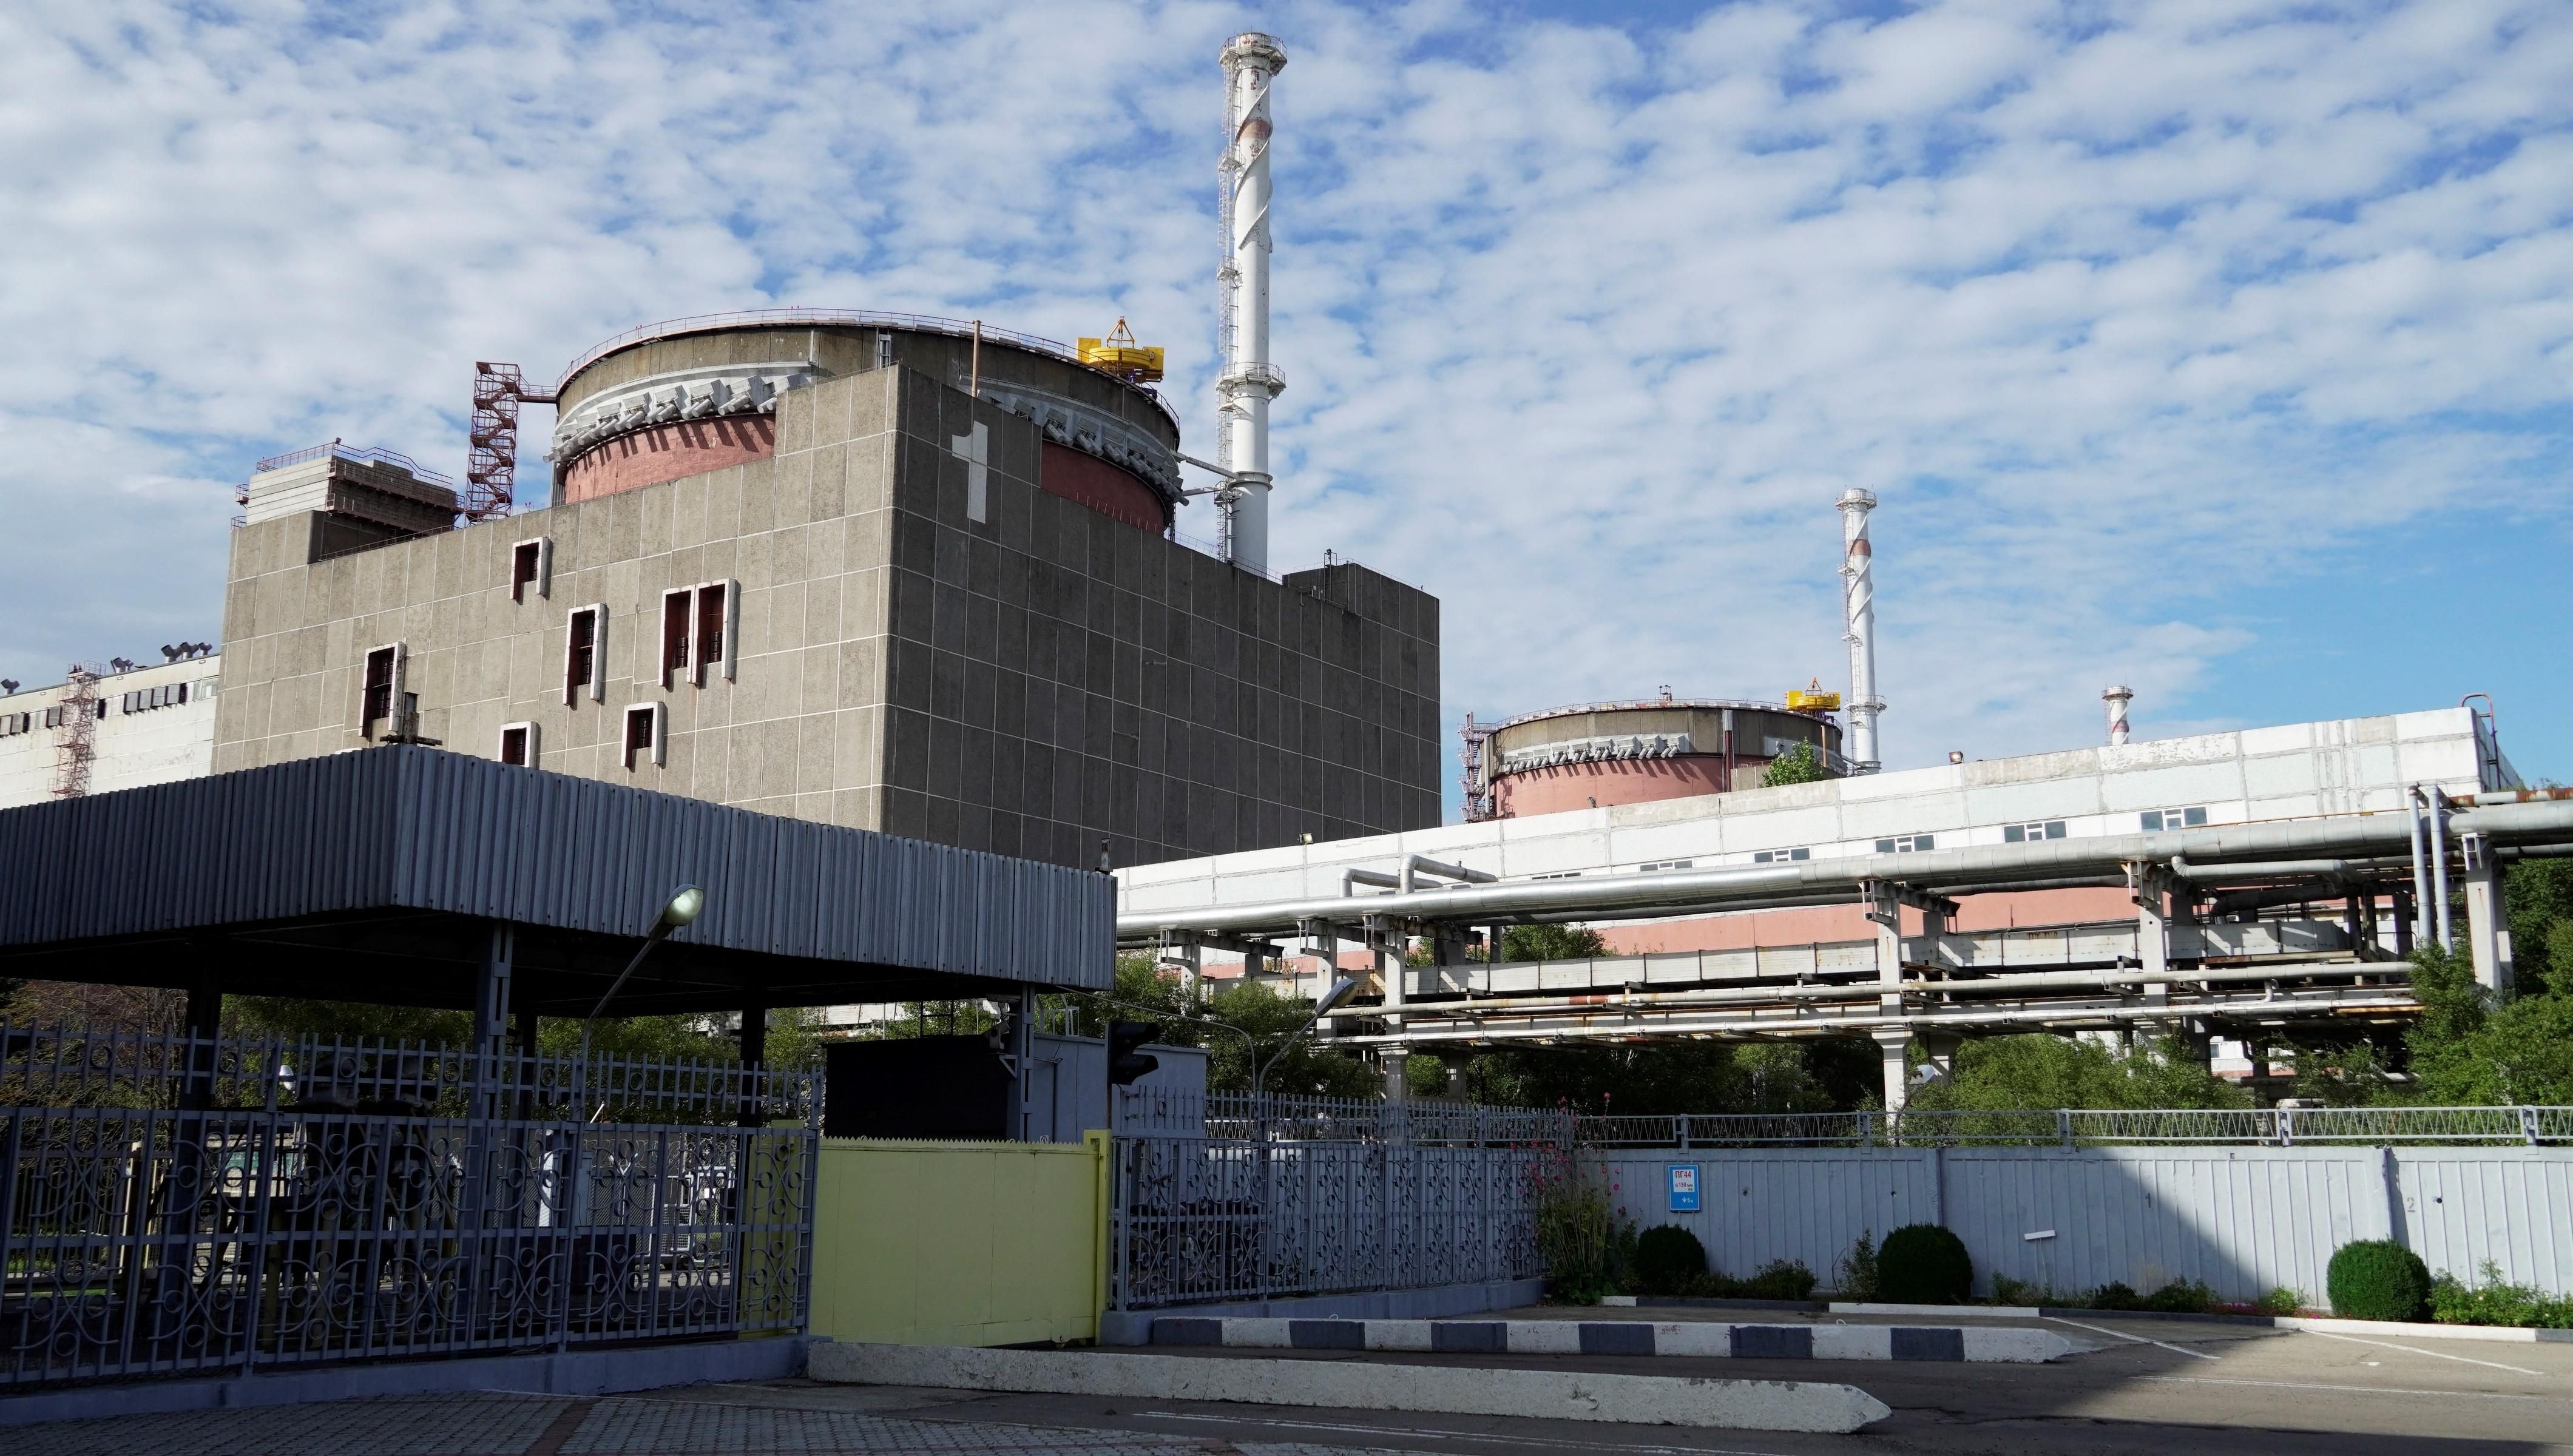 The Zaporizhzhia nuclear power plant in southeastern Ukraine is shown on September 11, 2022.